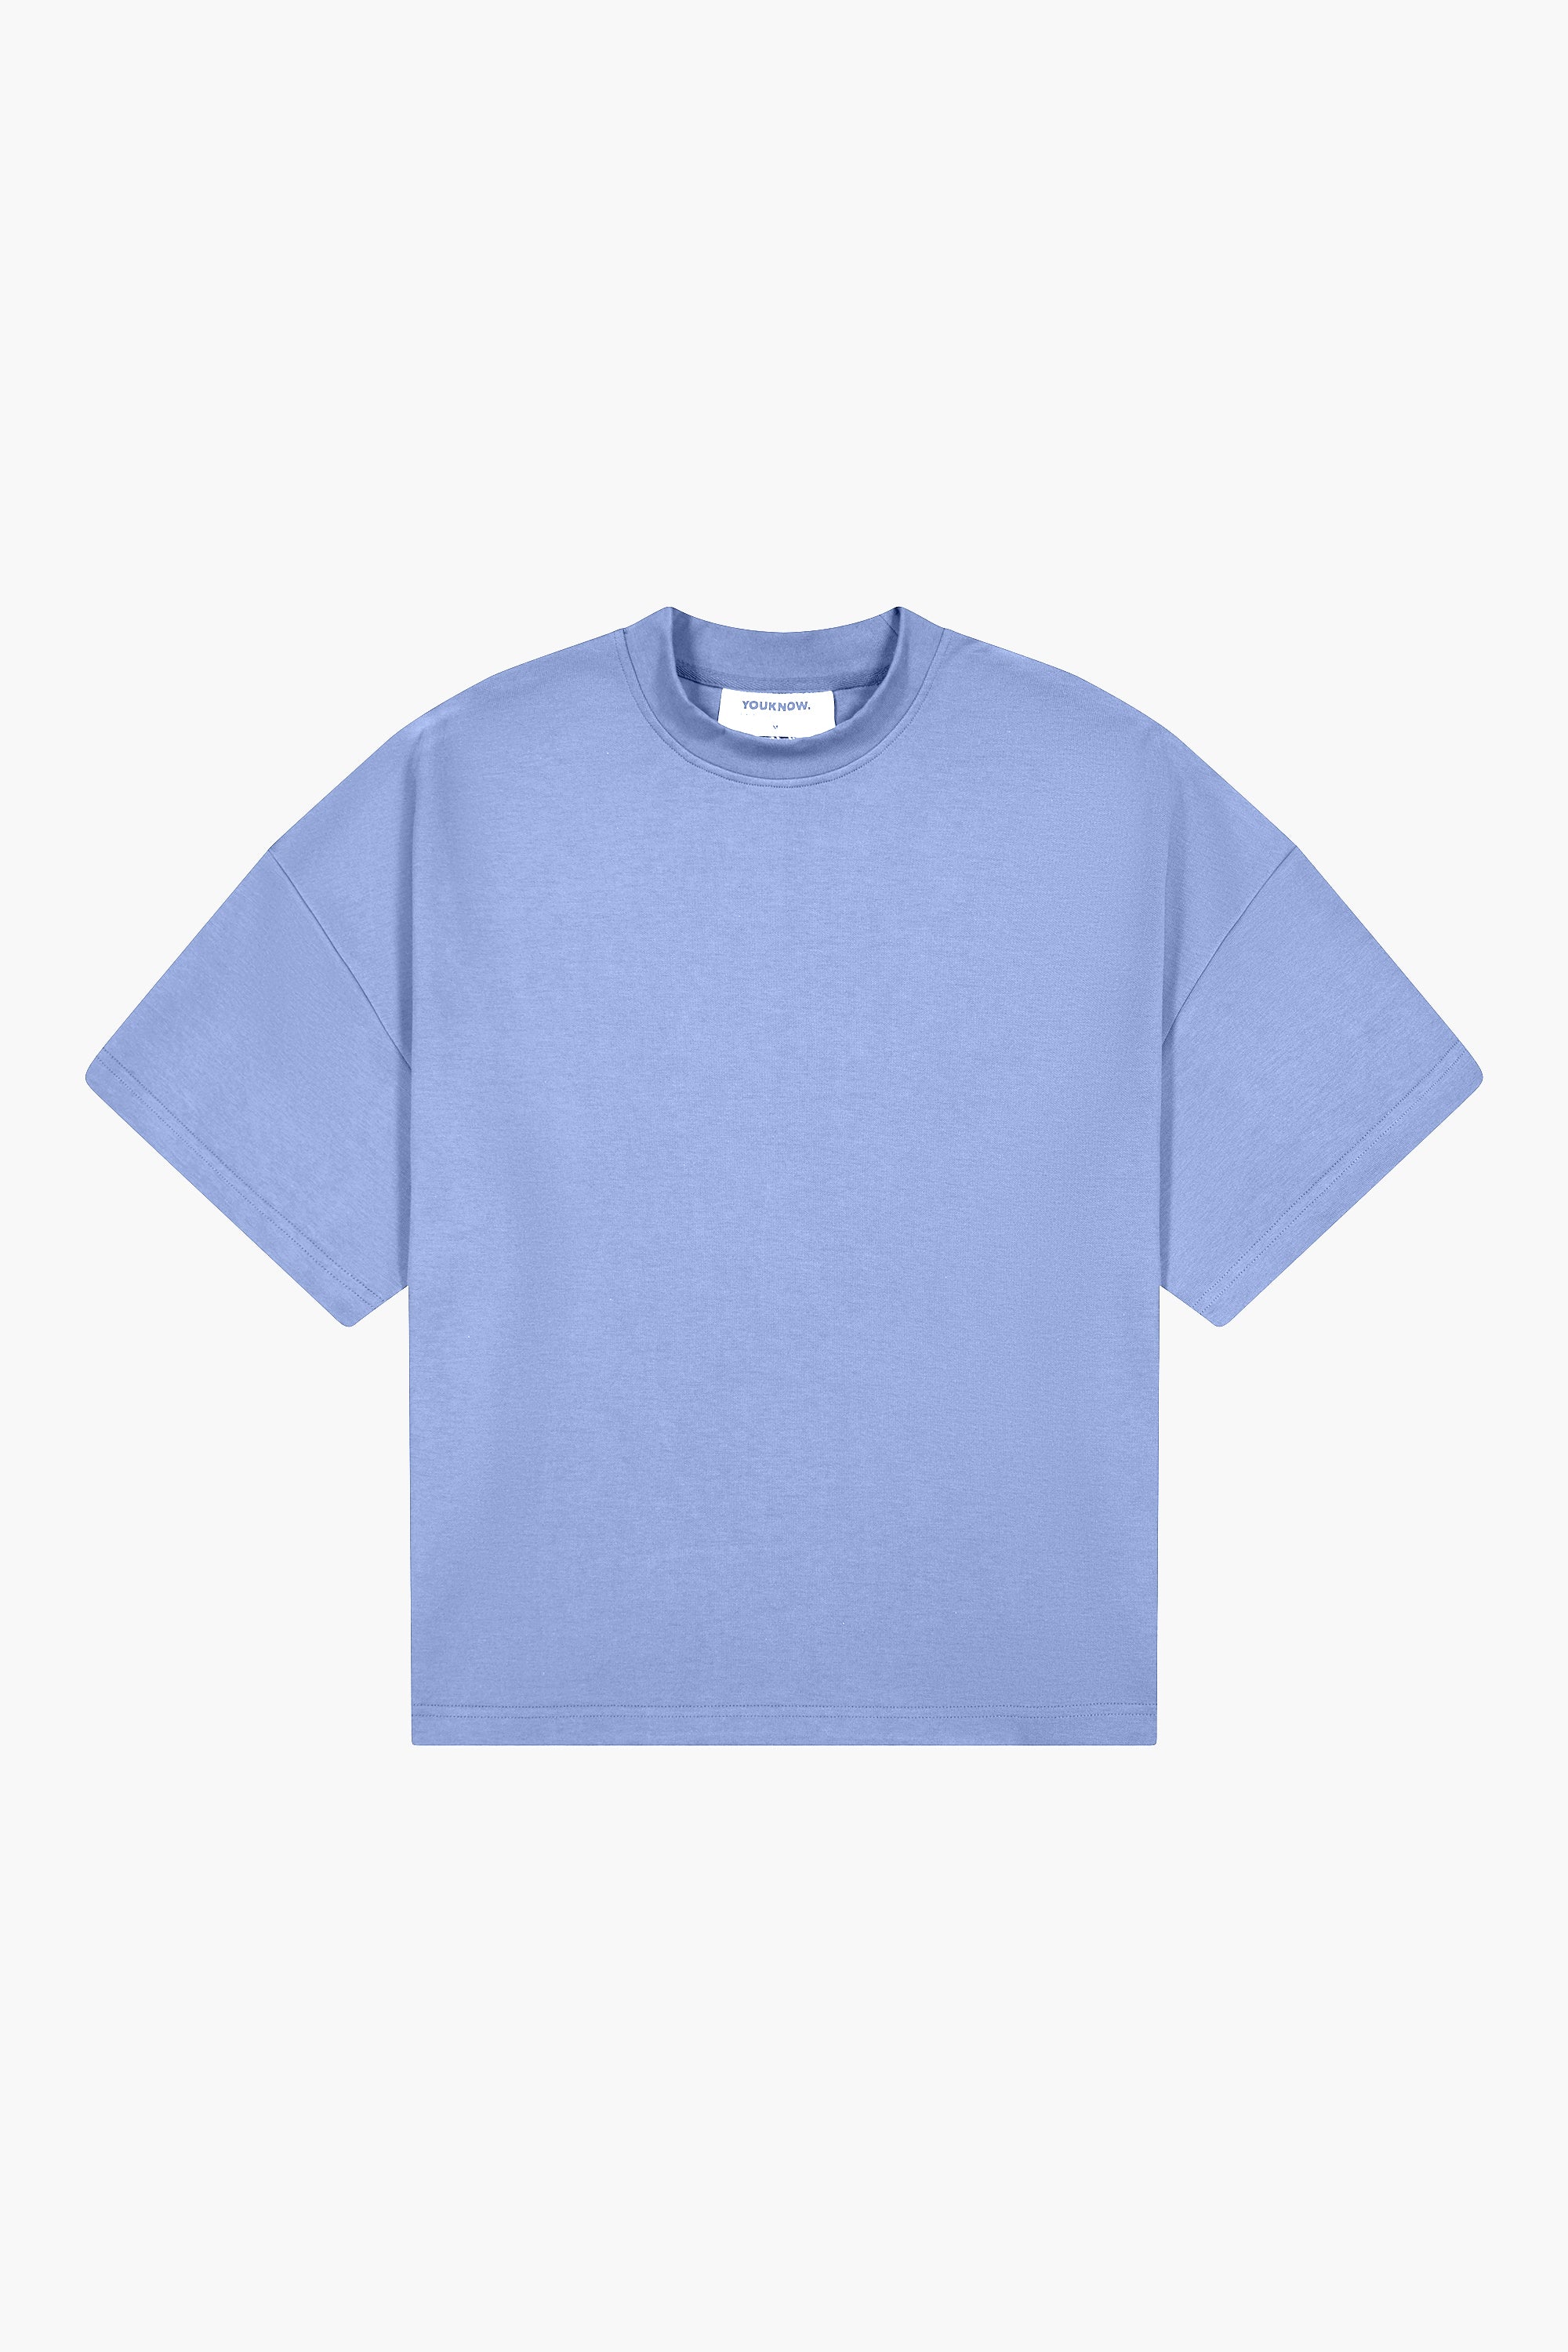 Fit finder image NOTHING TEE | SKY BLUE